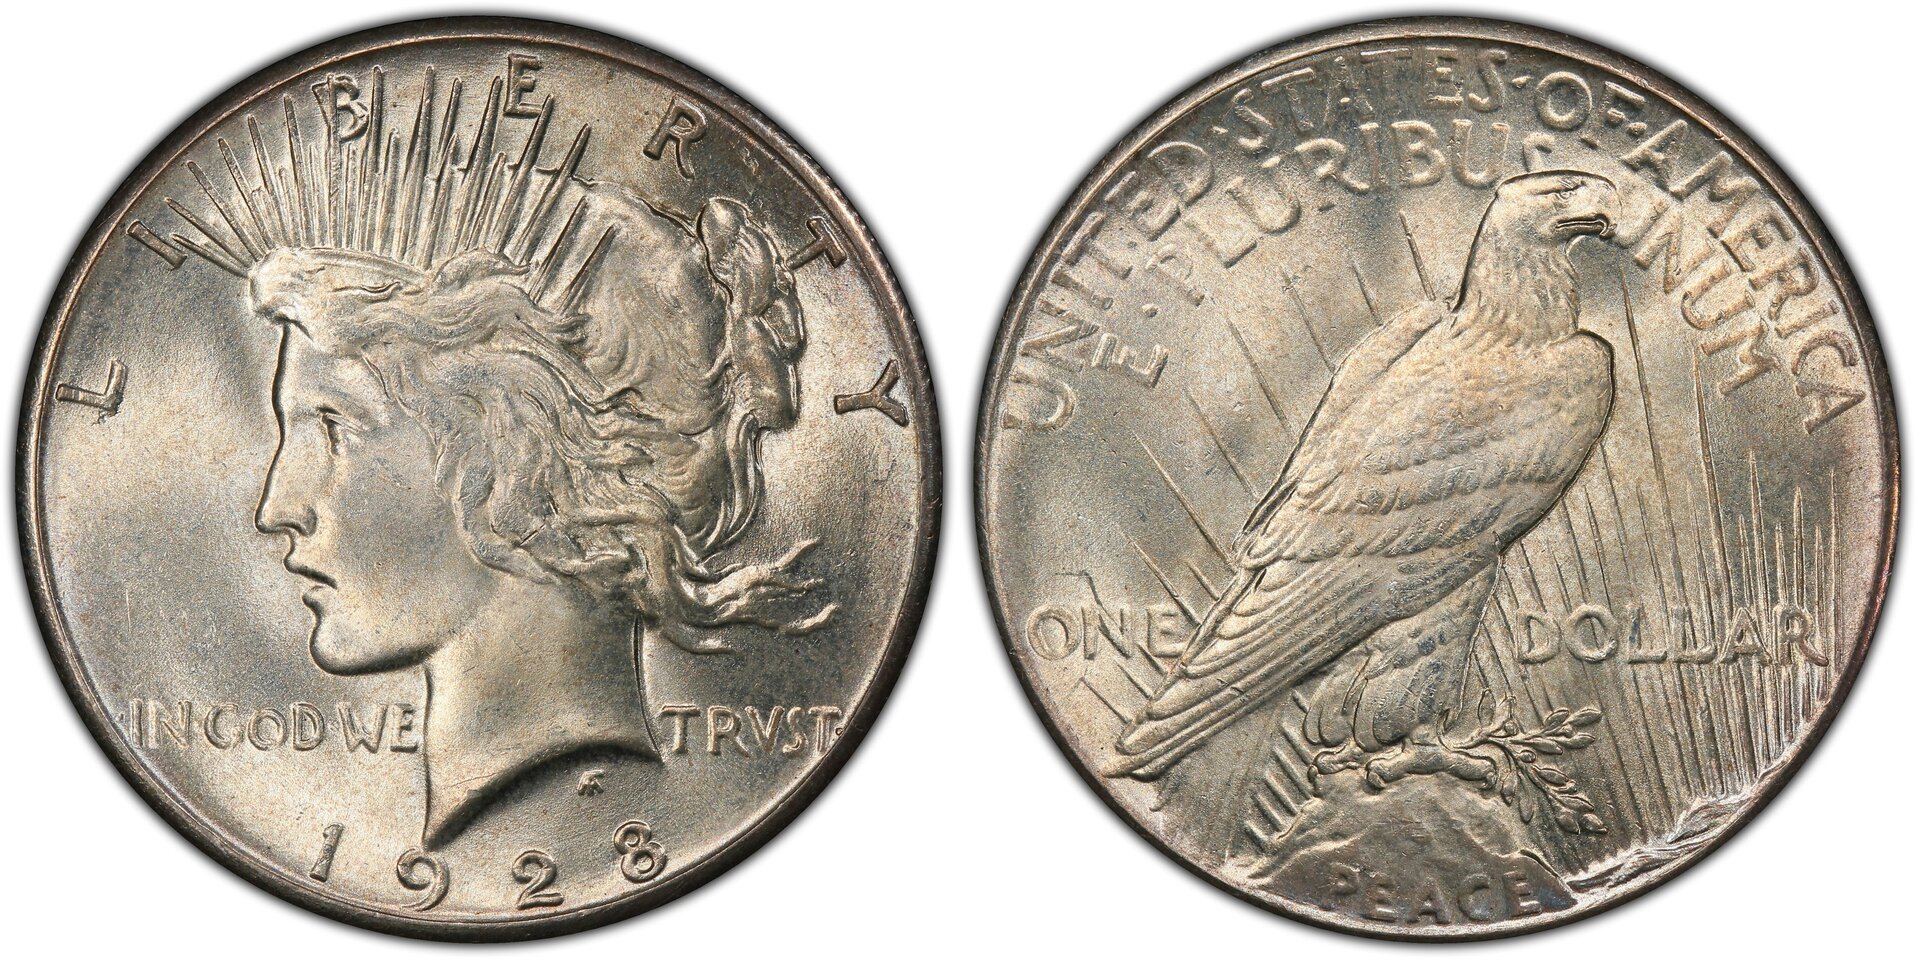 1928 Peace Coin Facts.jpg